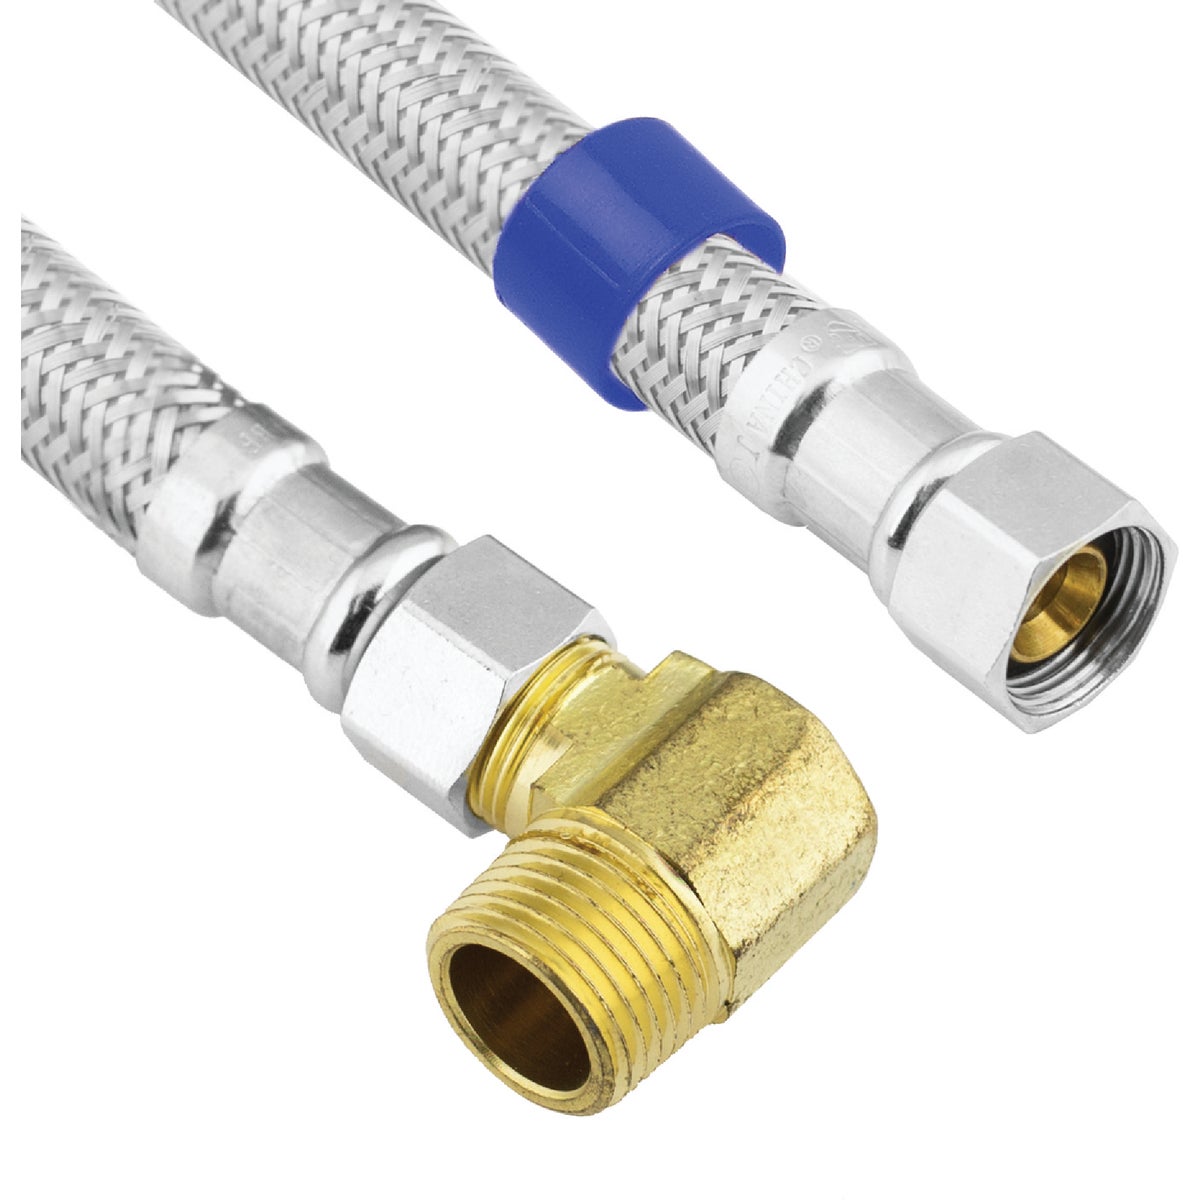 Lasco 3/8 In.C x 3/8 In.MIP Elbow x 72 In. L Braided Stainless Steel Flex Line Appliance Water Connector